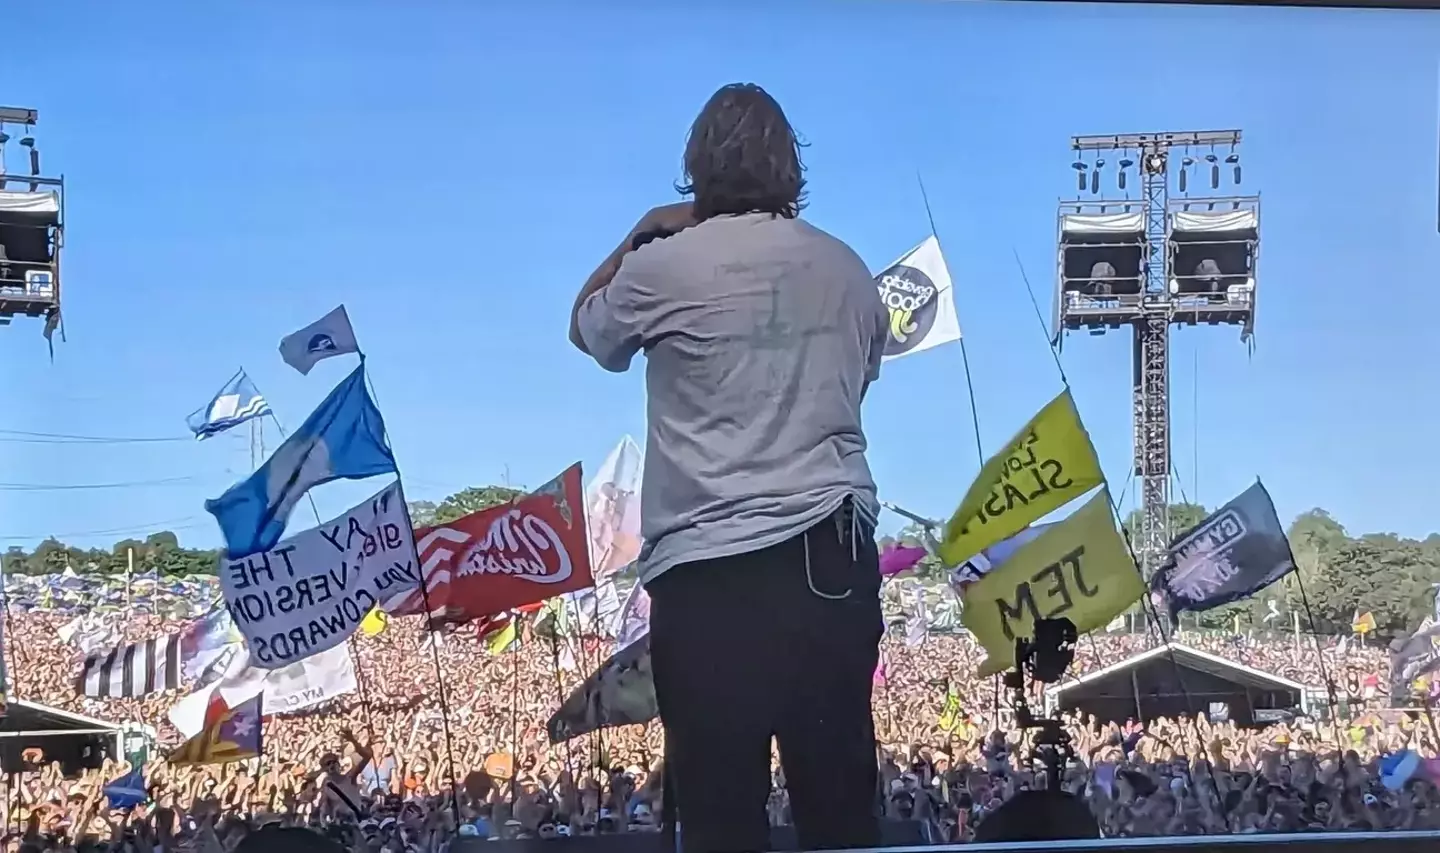 The 26-year-old powered through his Glastonbury set like an absolute champion as he took to the Pyramid stage.